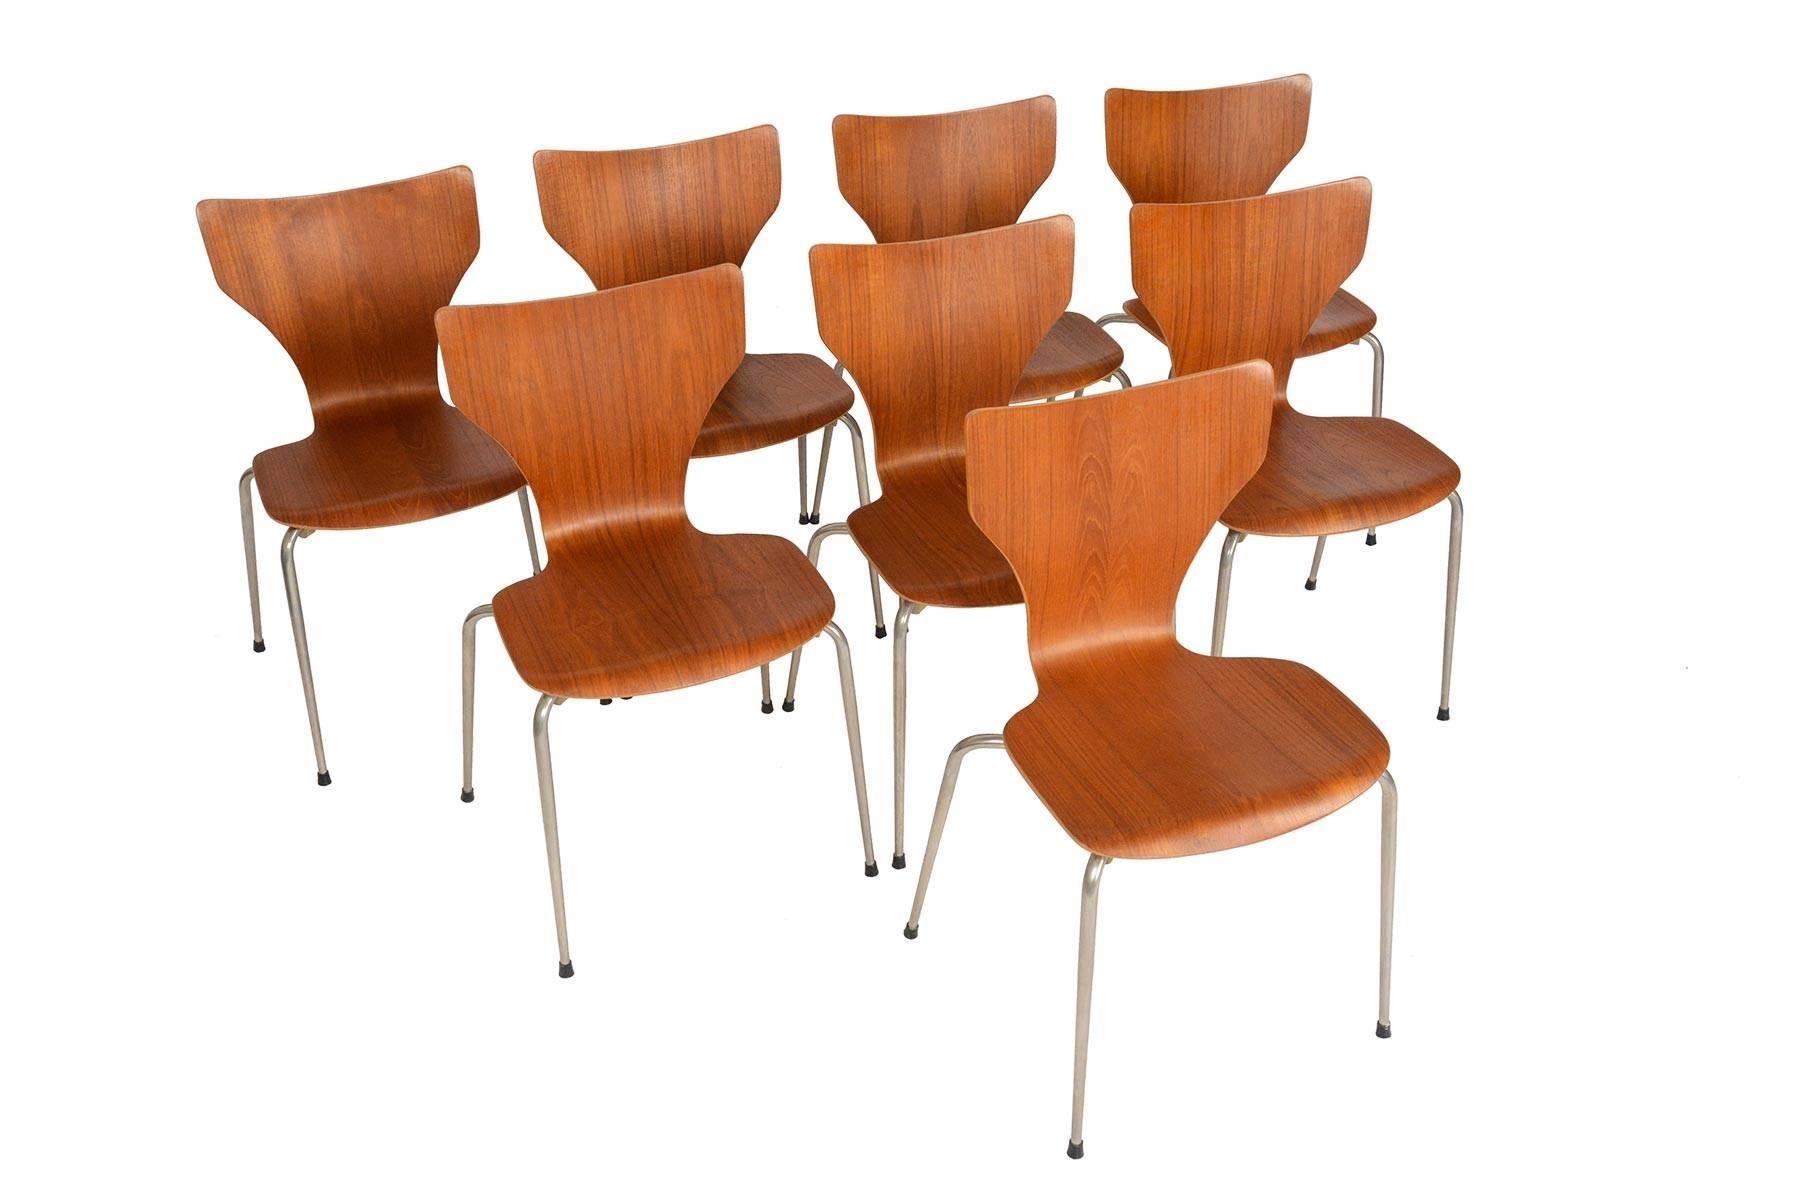 This set of eight Danish modern dining chairs in teak is a quintessential staple of Scandinavian design offering a light, stackable chair with an ergonomic form. The bent ply frame is veneered in teak and features a metal x- form base. In excellent